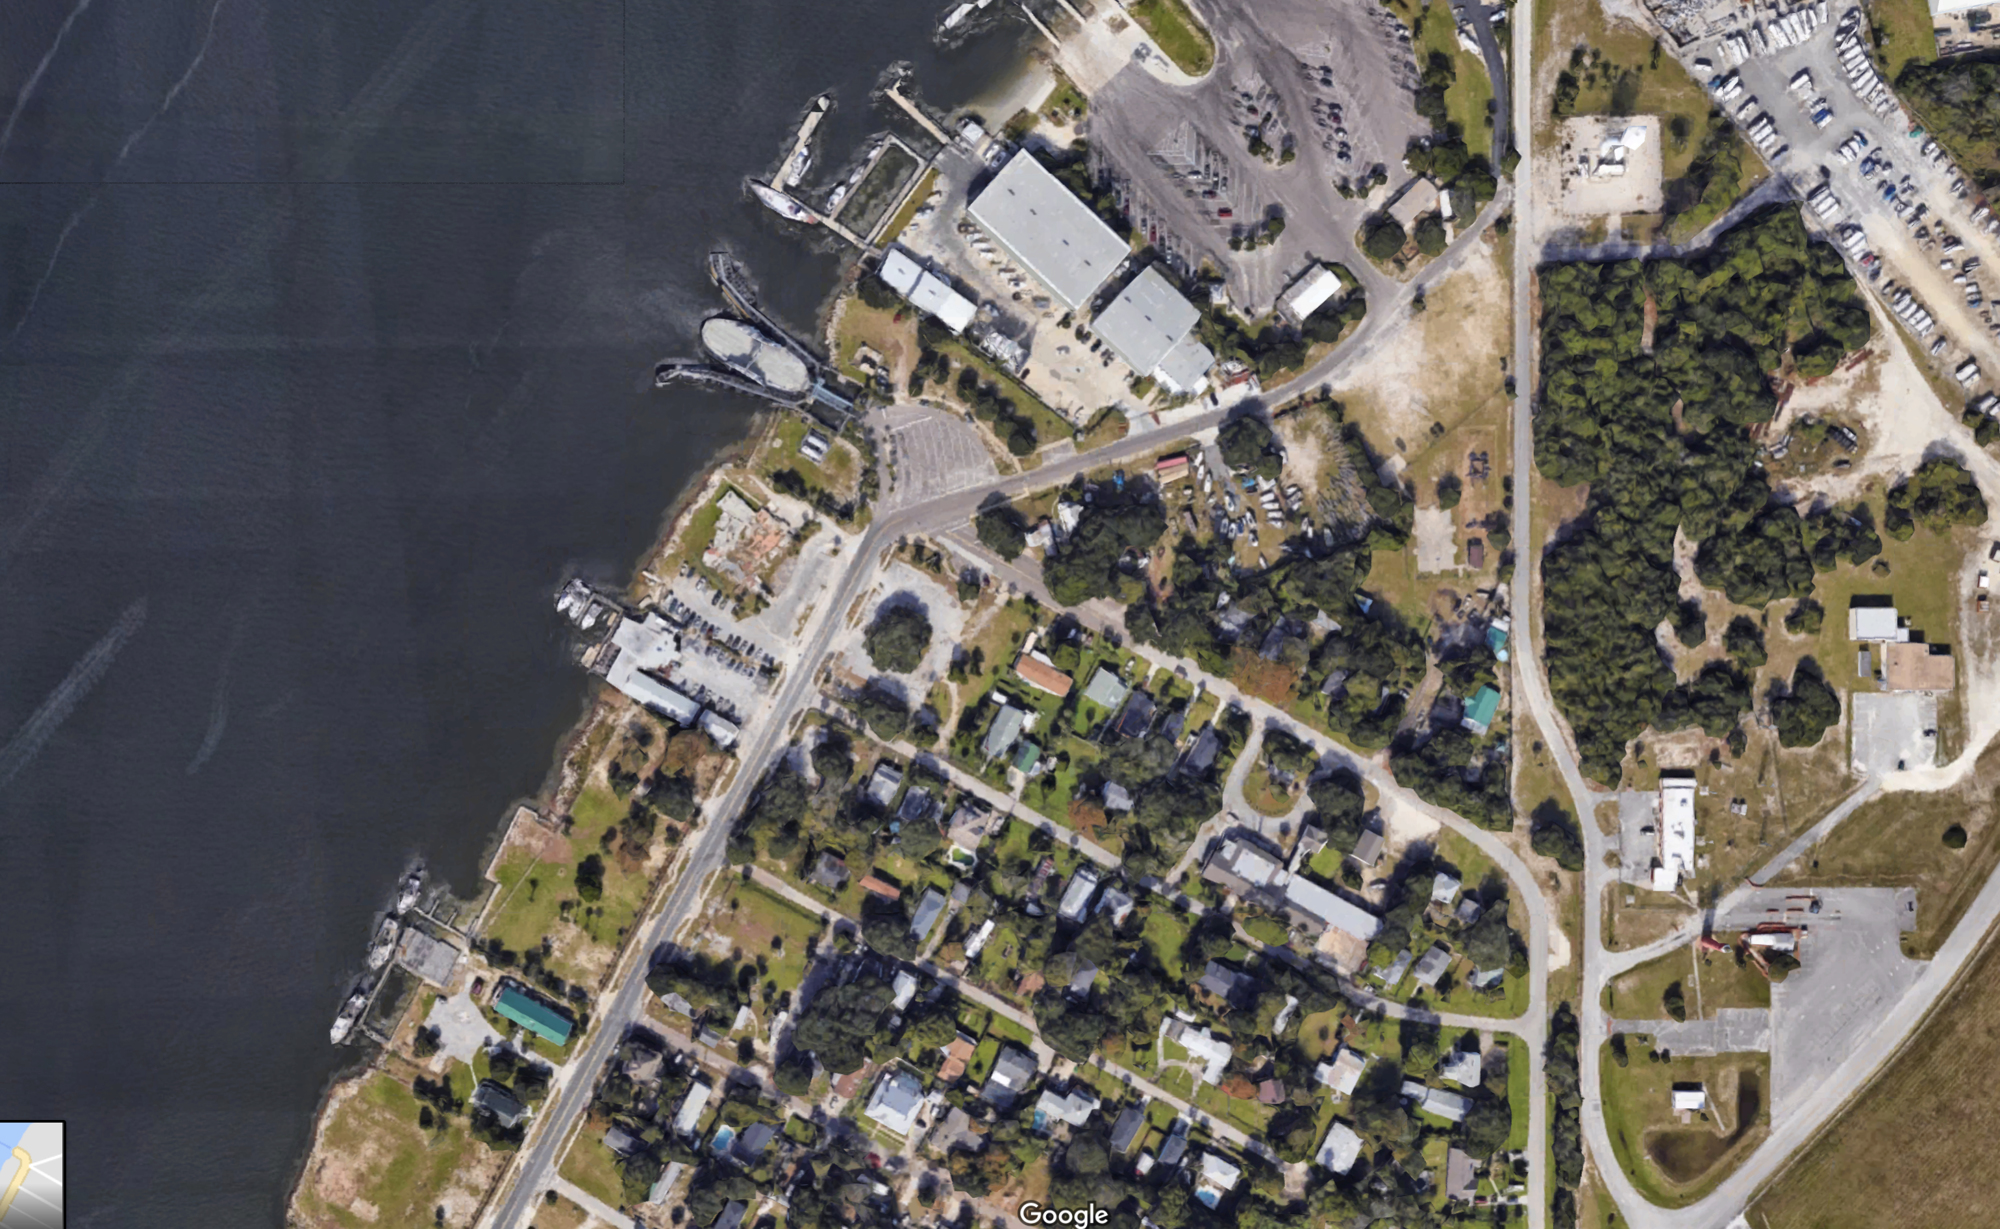 JaxPort approved selling 6.72 acres along Ocean Street just south of the St. Johns River Ferry back to the city for $1. The property is shown above at the right of Singleton’s Seafood Shack.